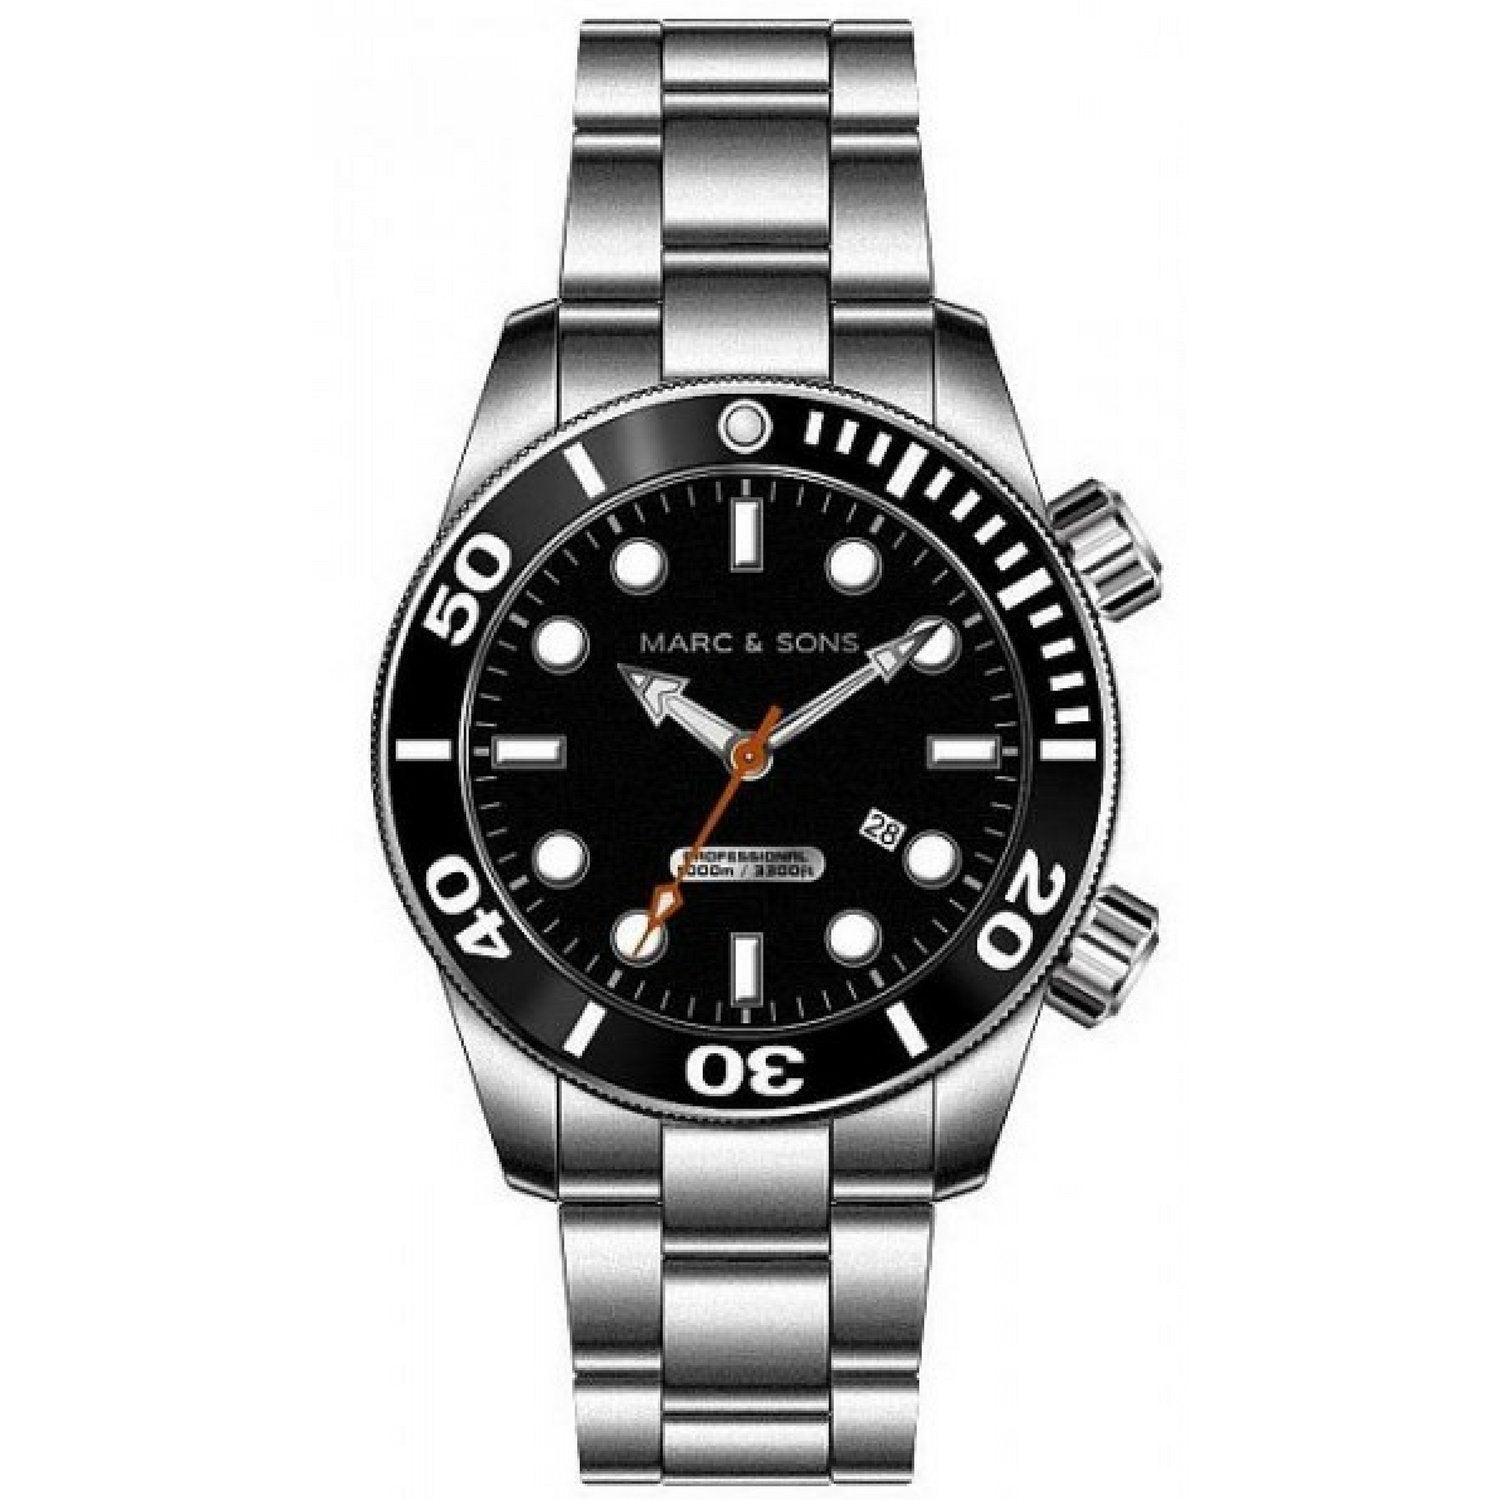 MARC & SONS 1000M Professional automatic Diver watch MSD-020